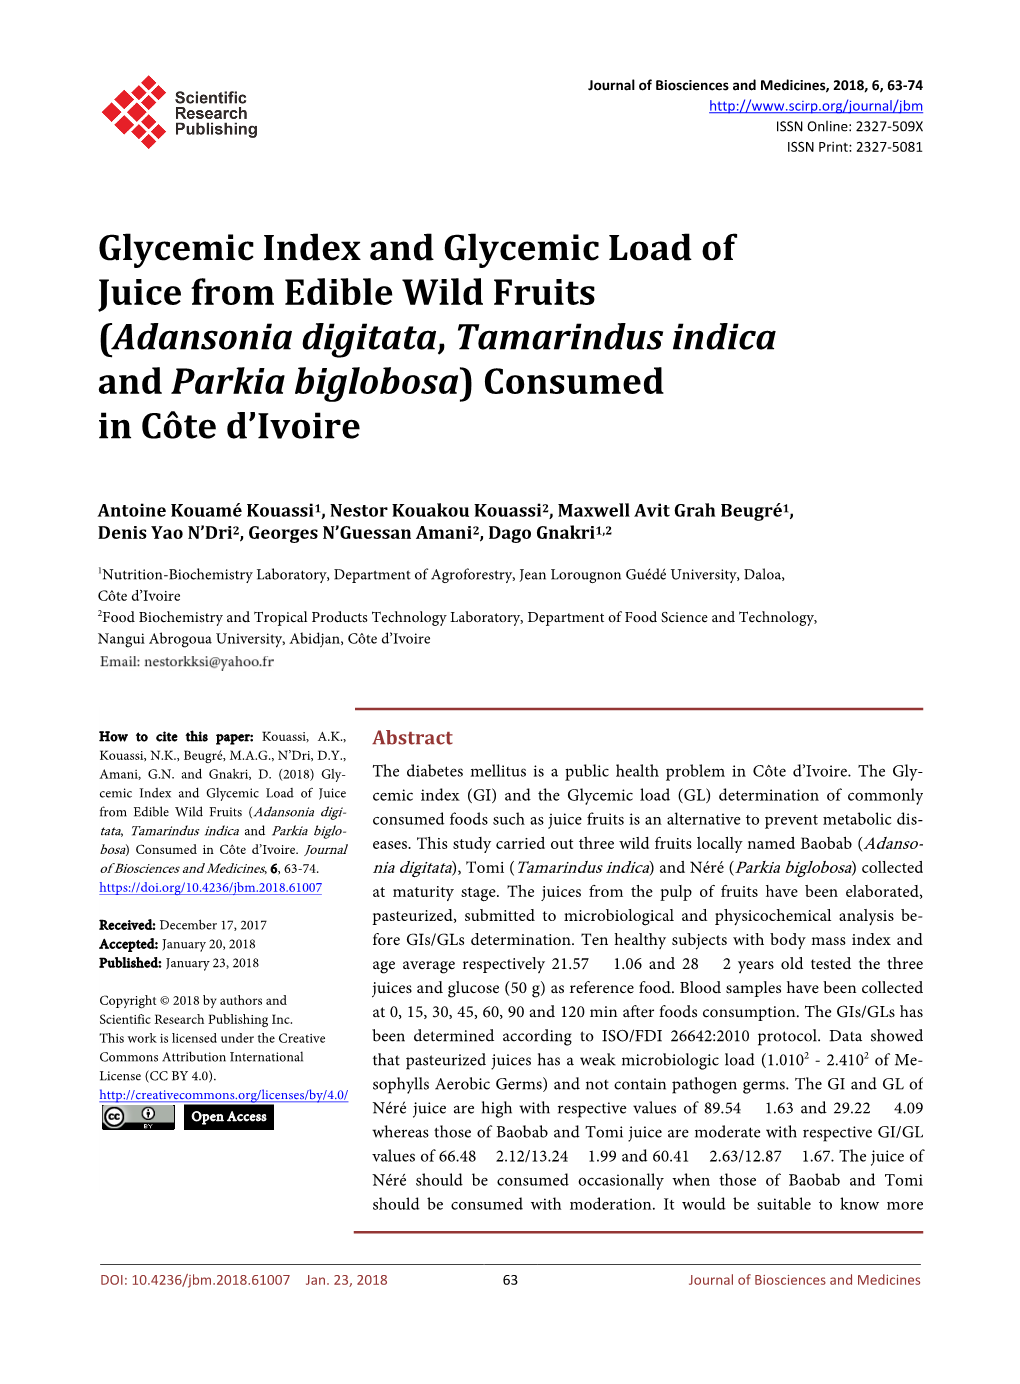 Glycemic Index and Glycemic Load of Juice from Edible Wild Fruits (Adansonia Digitata, Tamarindus Indica and Parkia Biglobosa) Consumed in Côte D’Ivoire